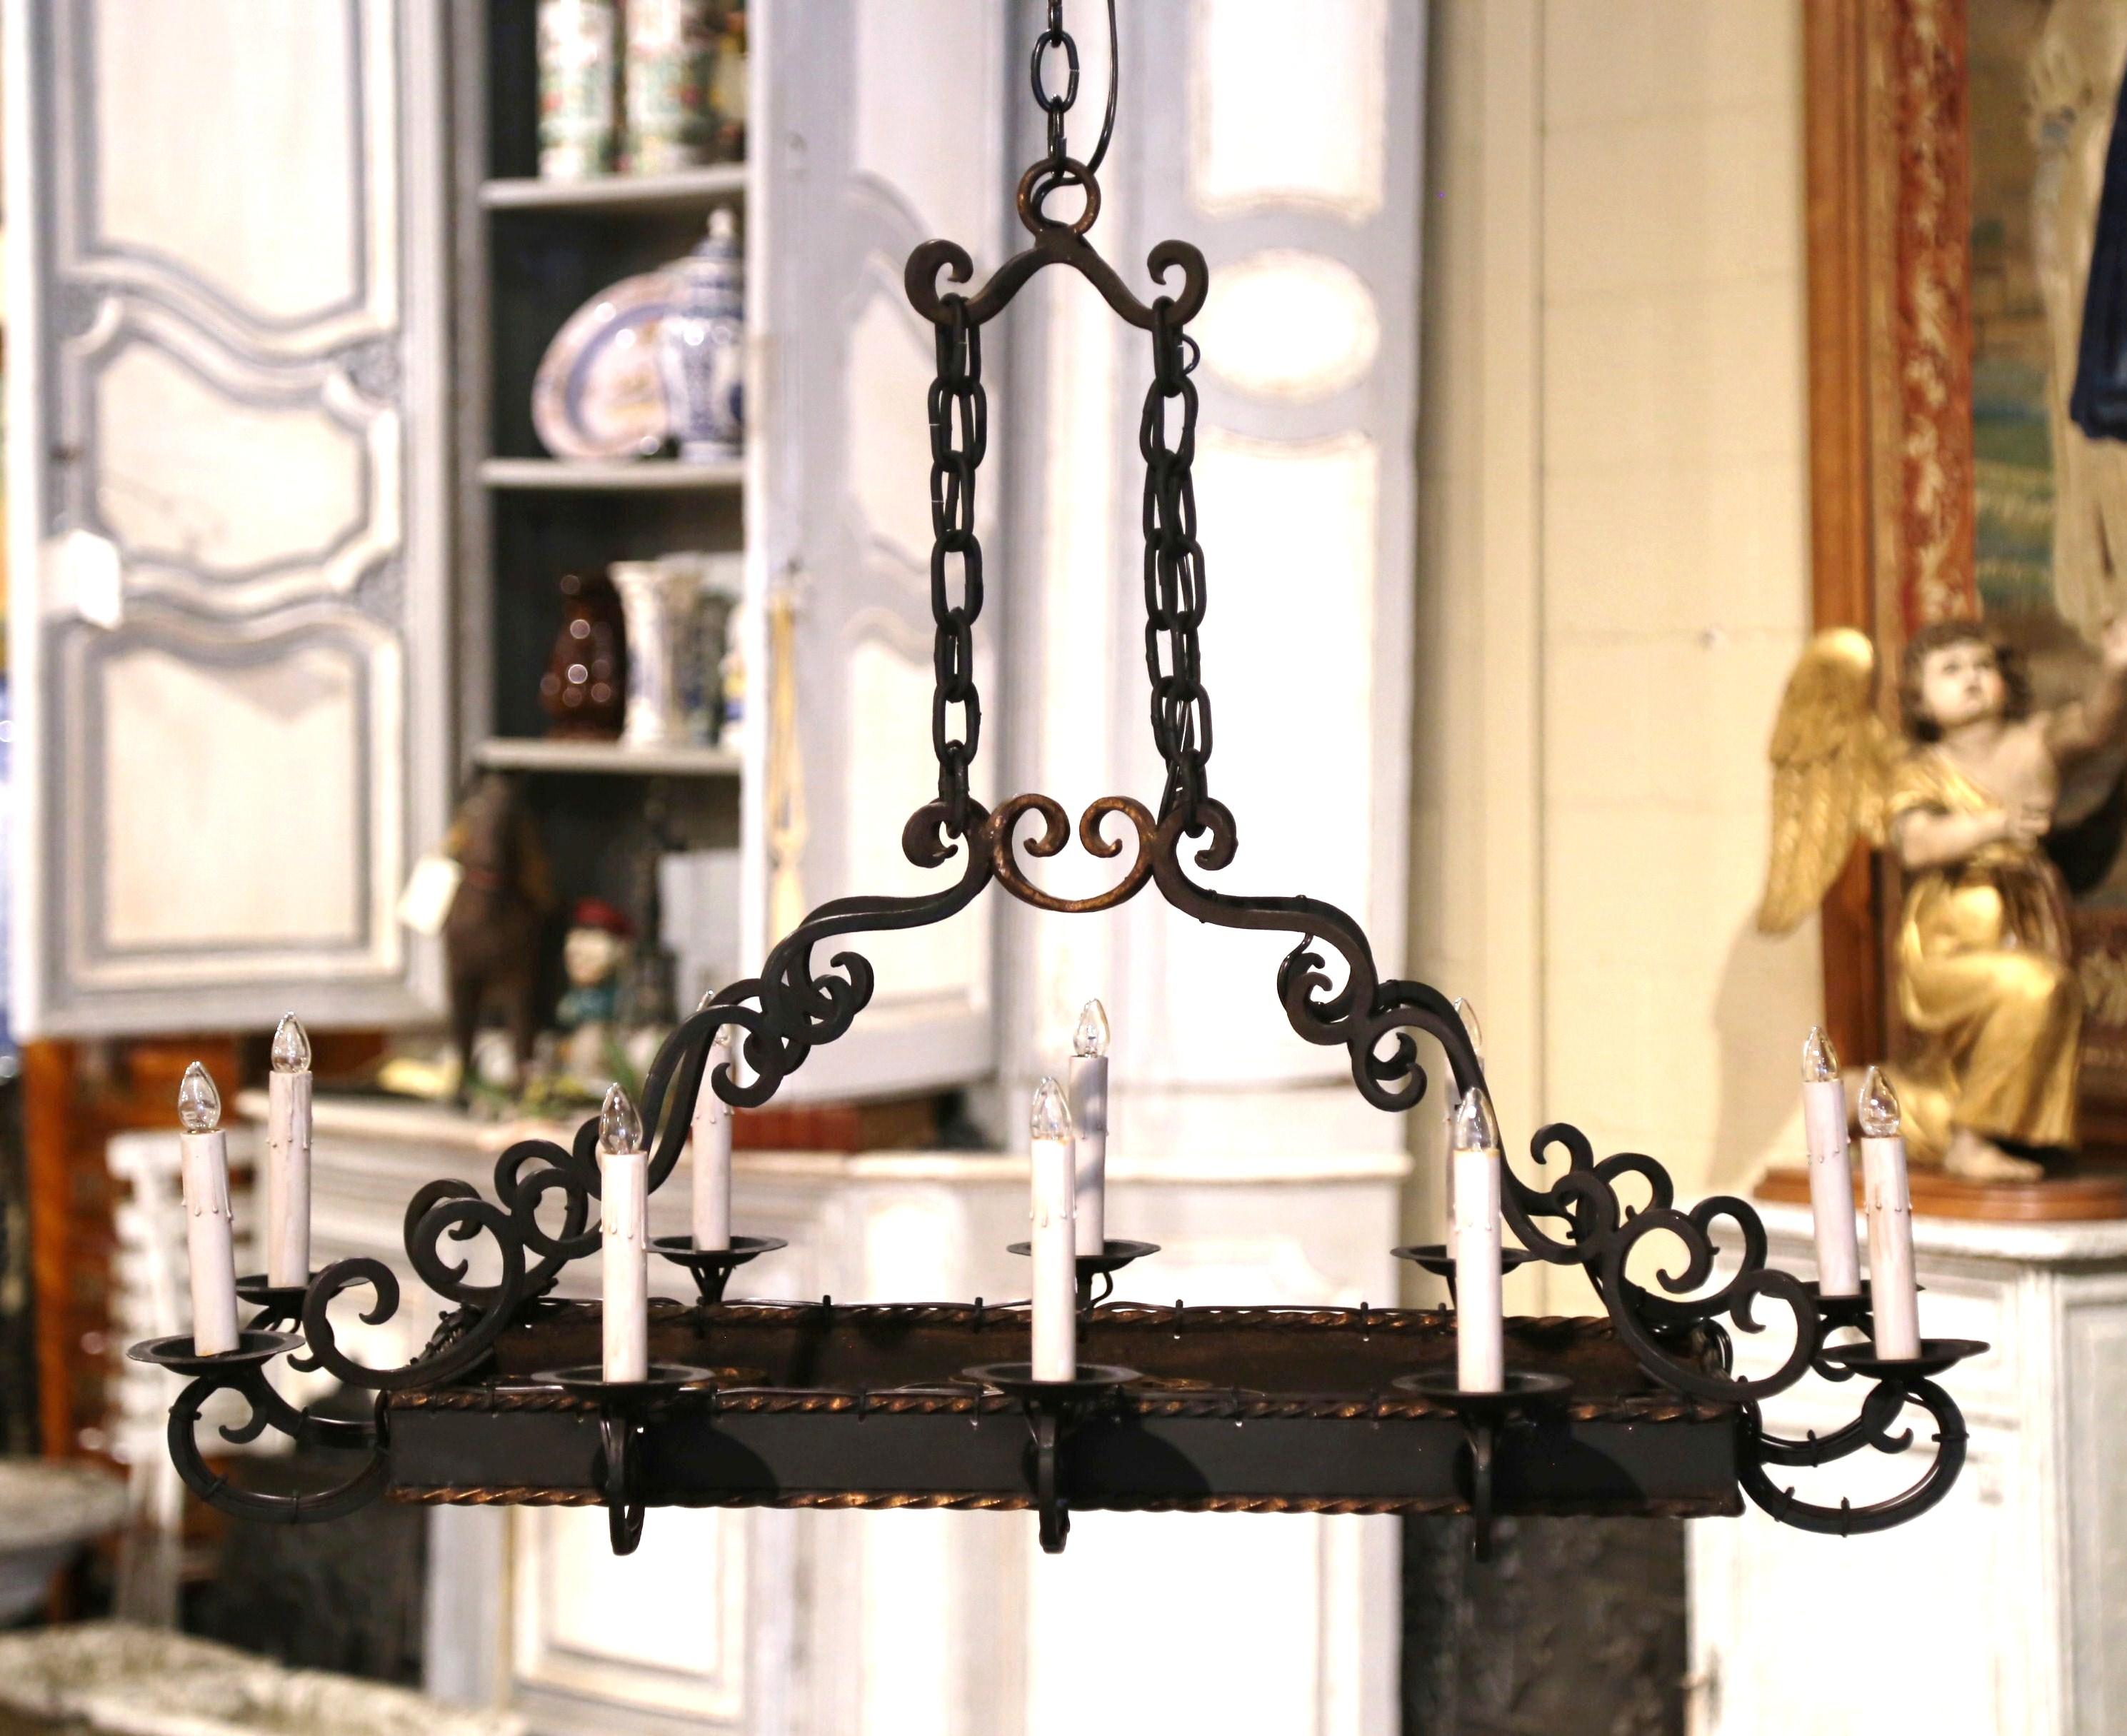 Decorate a kitchen island or breakfast room with this elegant antique light fixture. Forged in France circa 1920, and rectangular in shape, the large chandelier has ten lights newly wired, and dressed with decorative dripping candle sleeve covers.